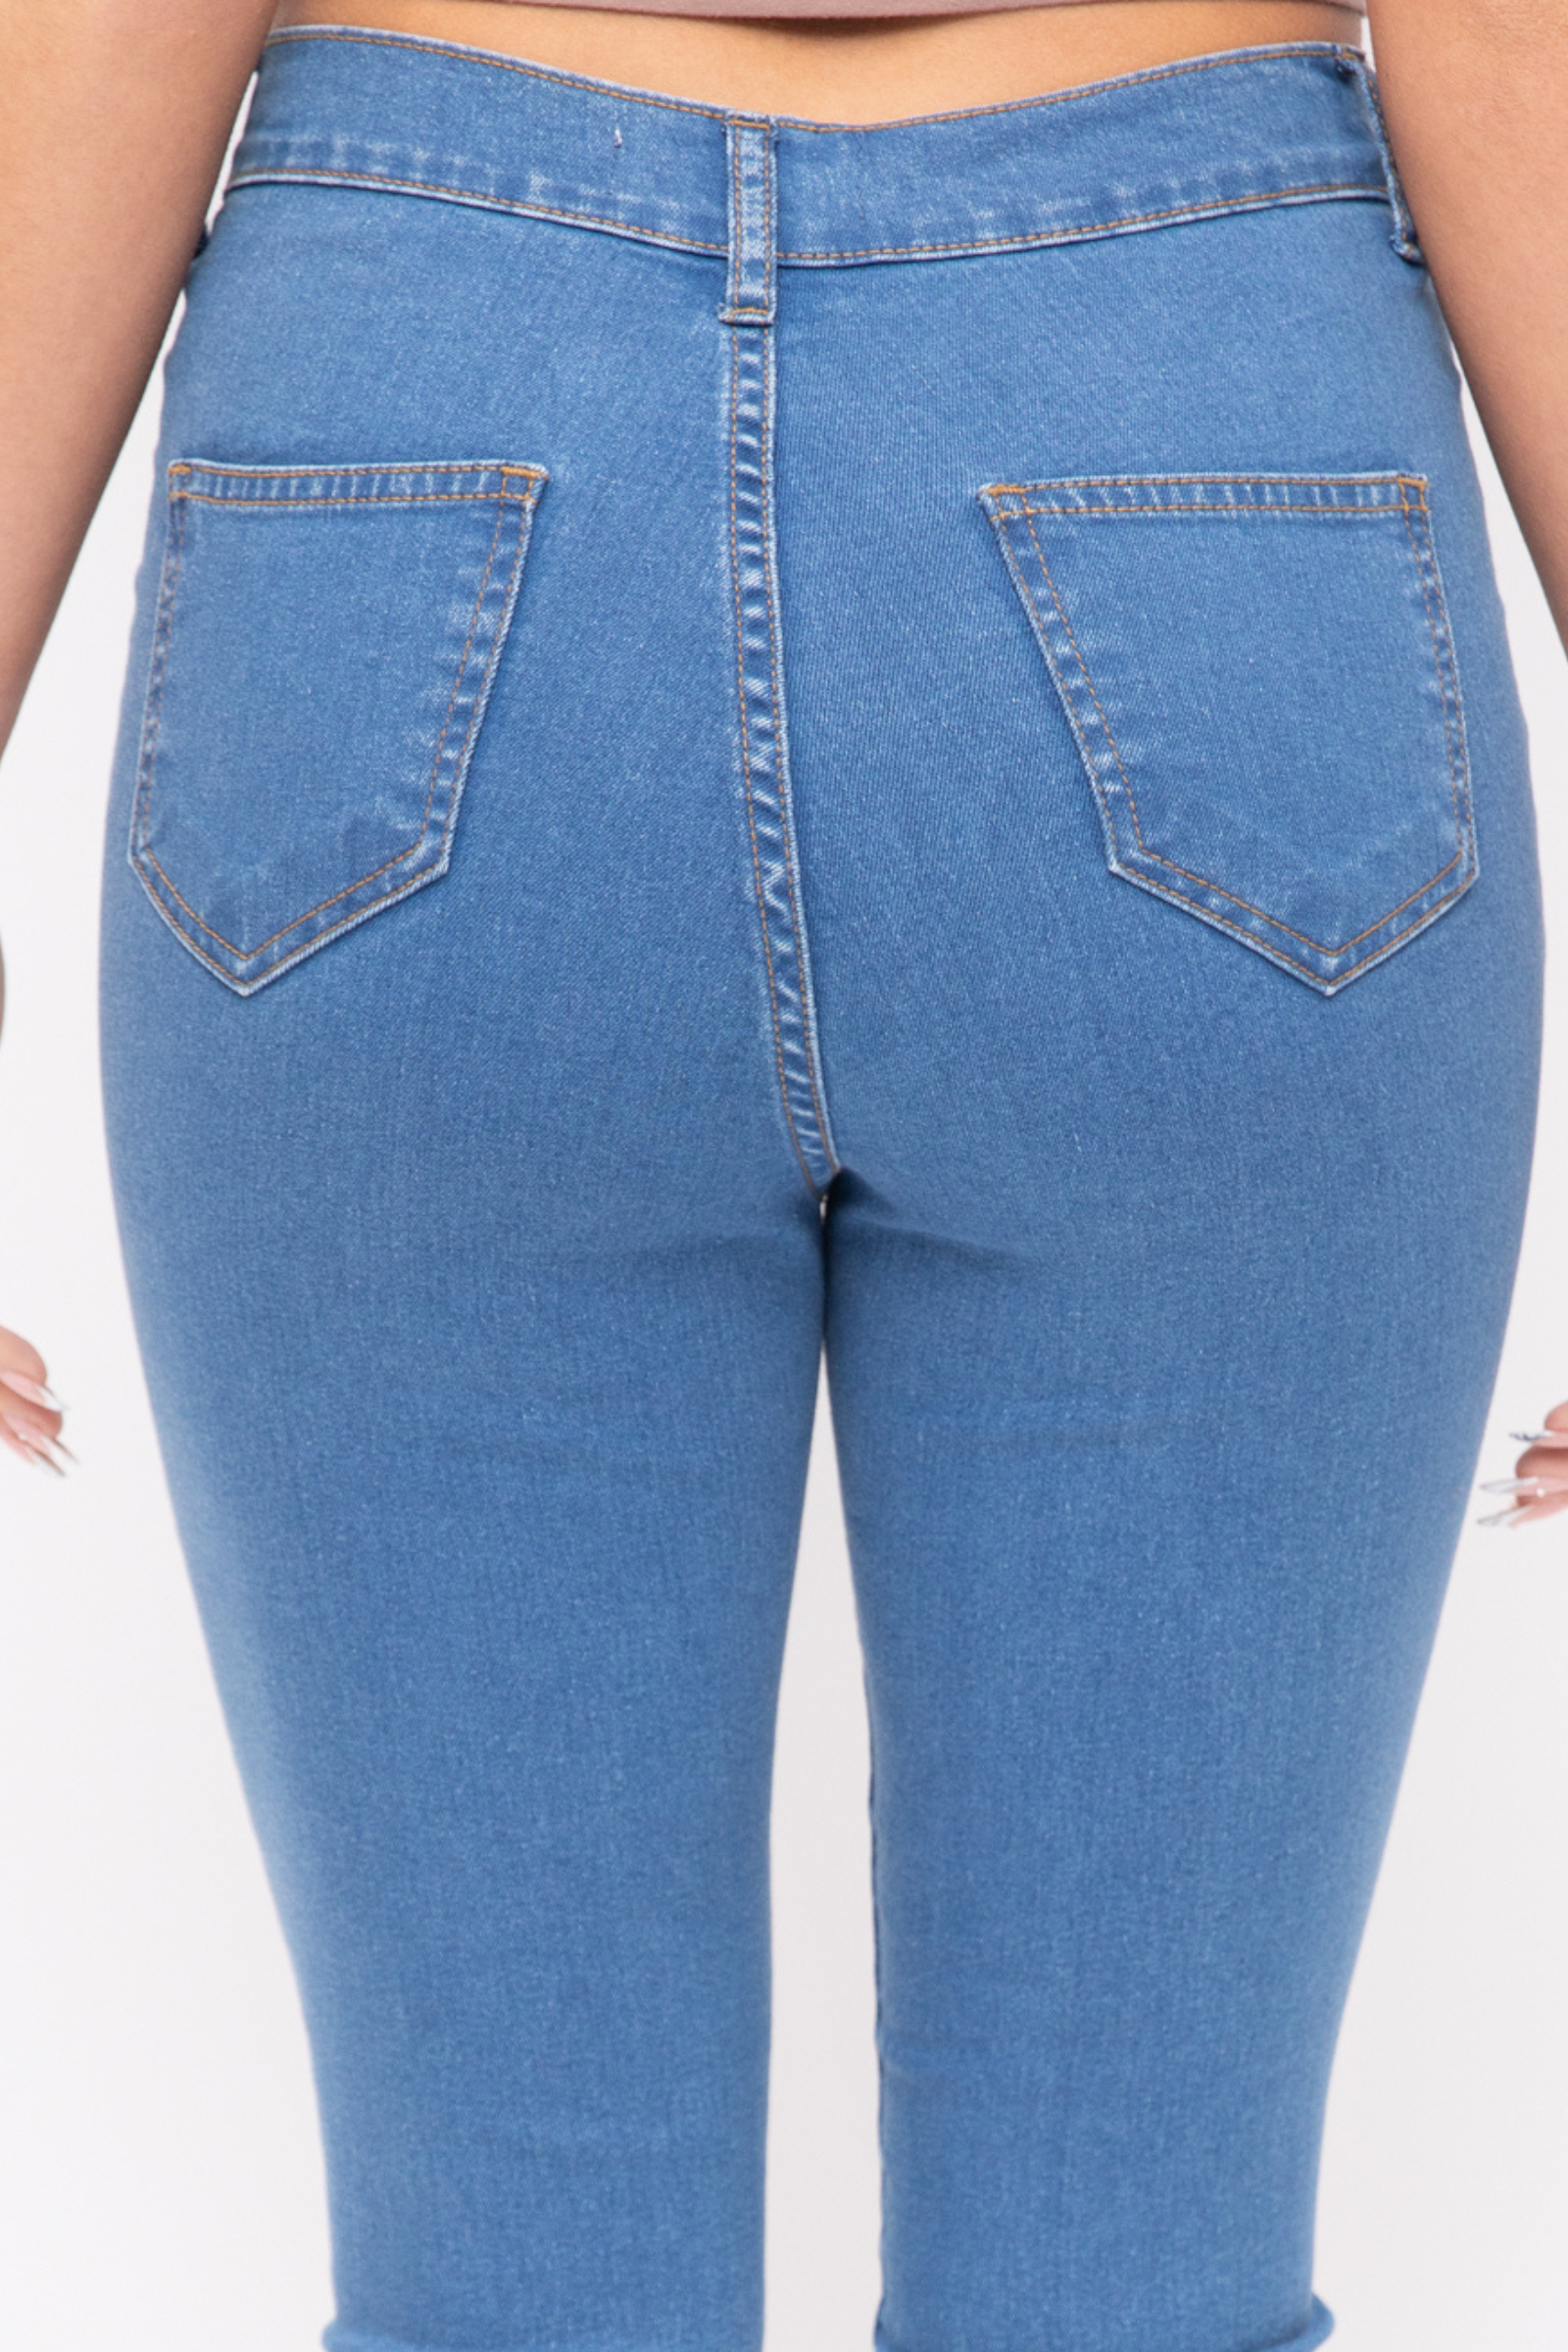 Women's Jeans – Don't Think Twice